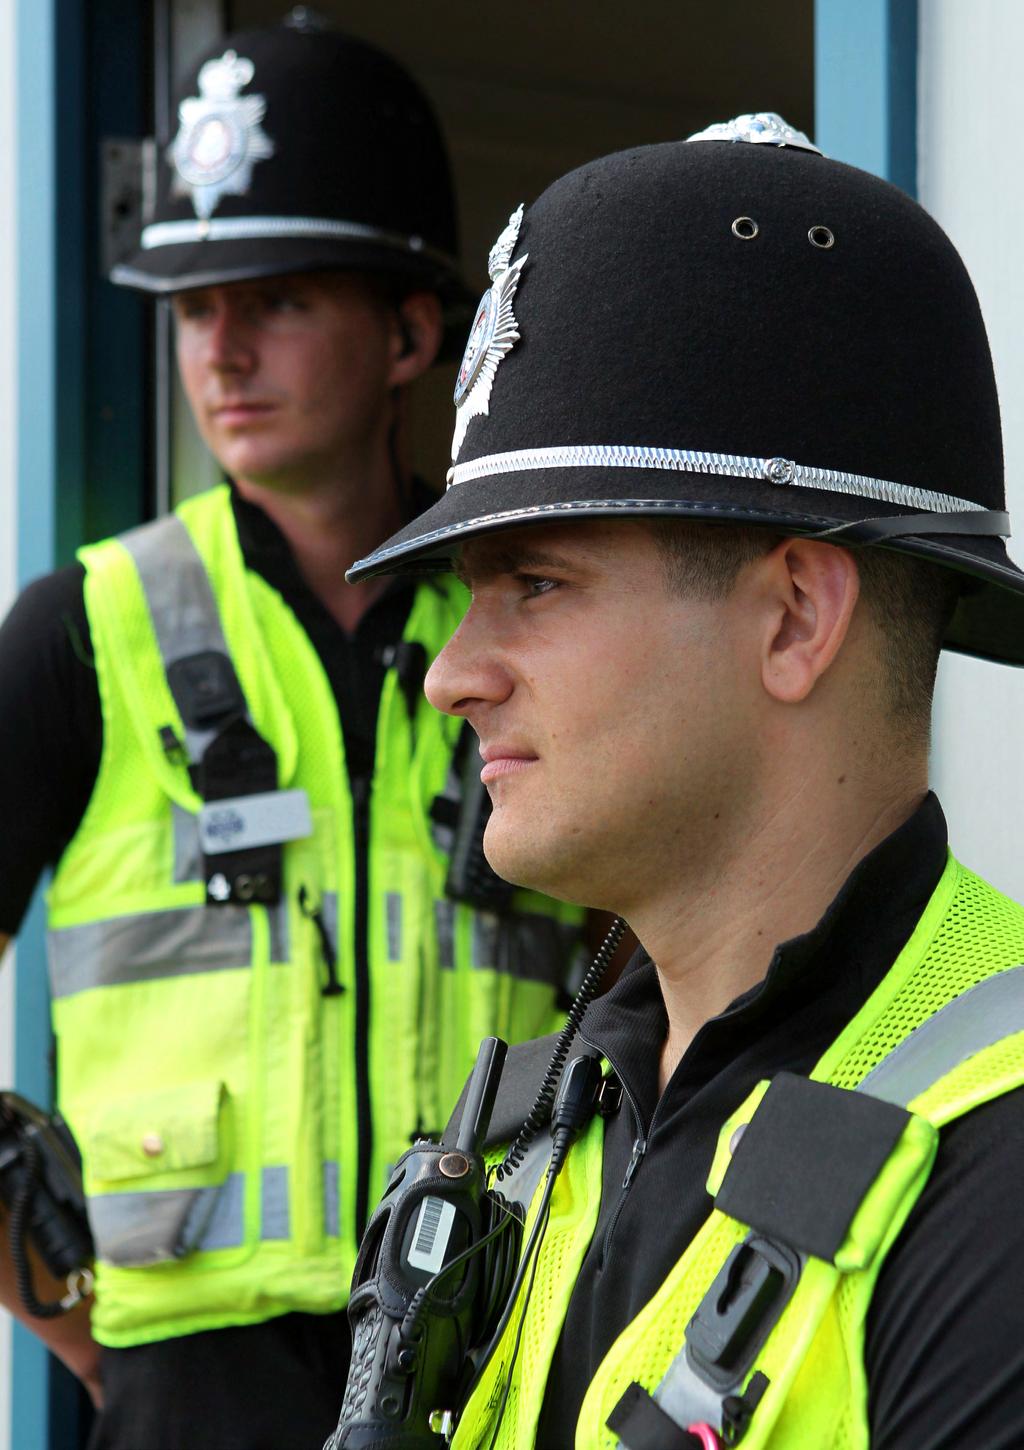 Over 229,000 monthly visits from police and justice professionals The news service of choice for the police and justice sectors Over 83,000 visits from active job seekers Over